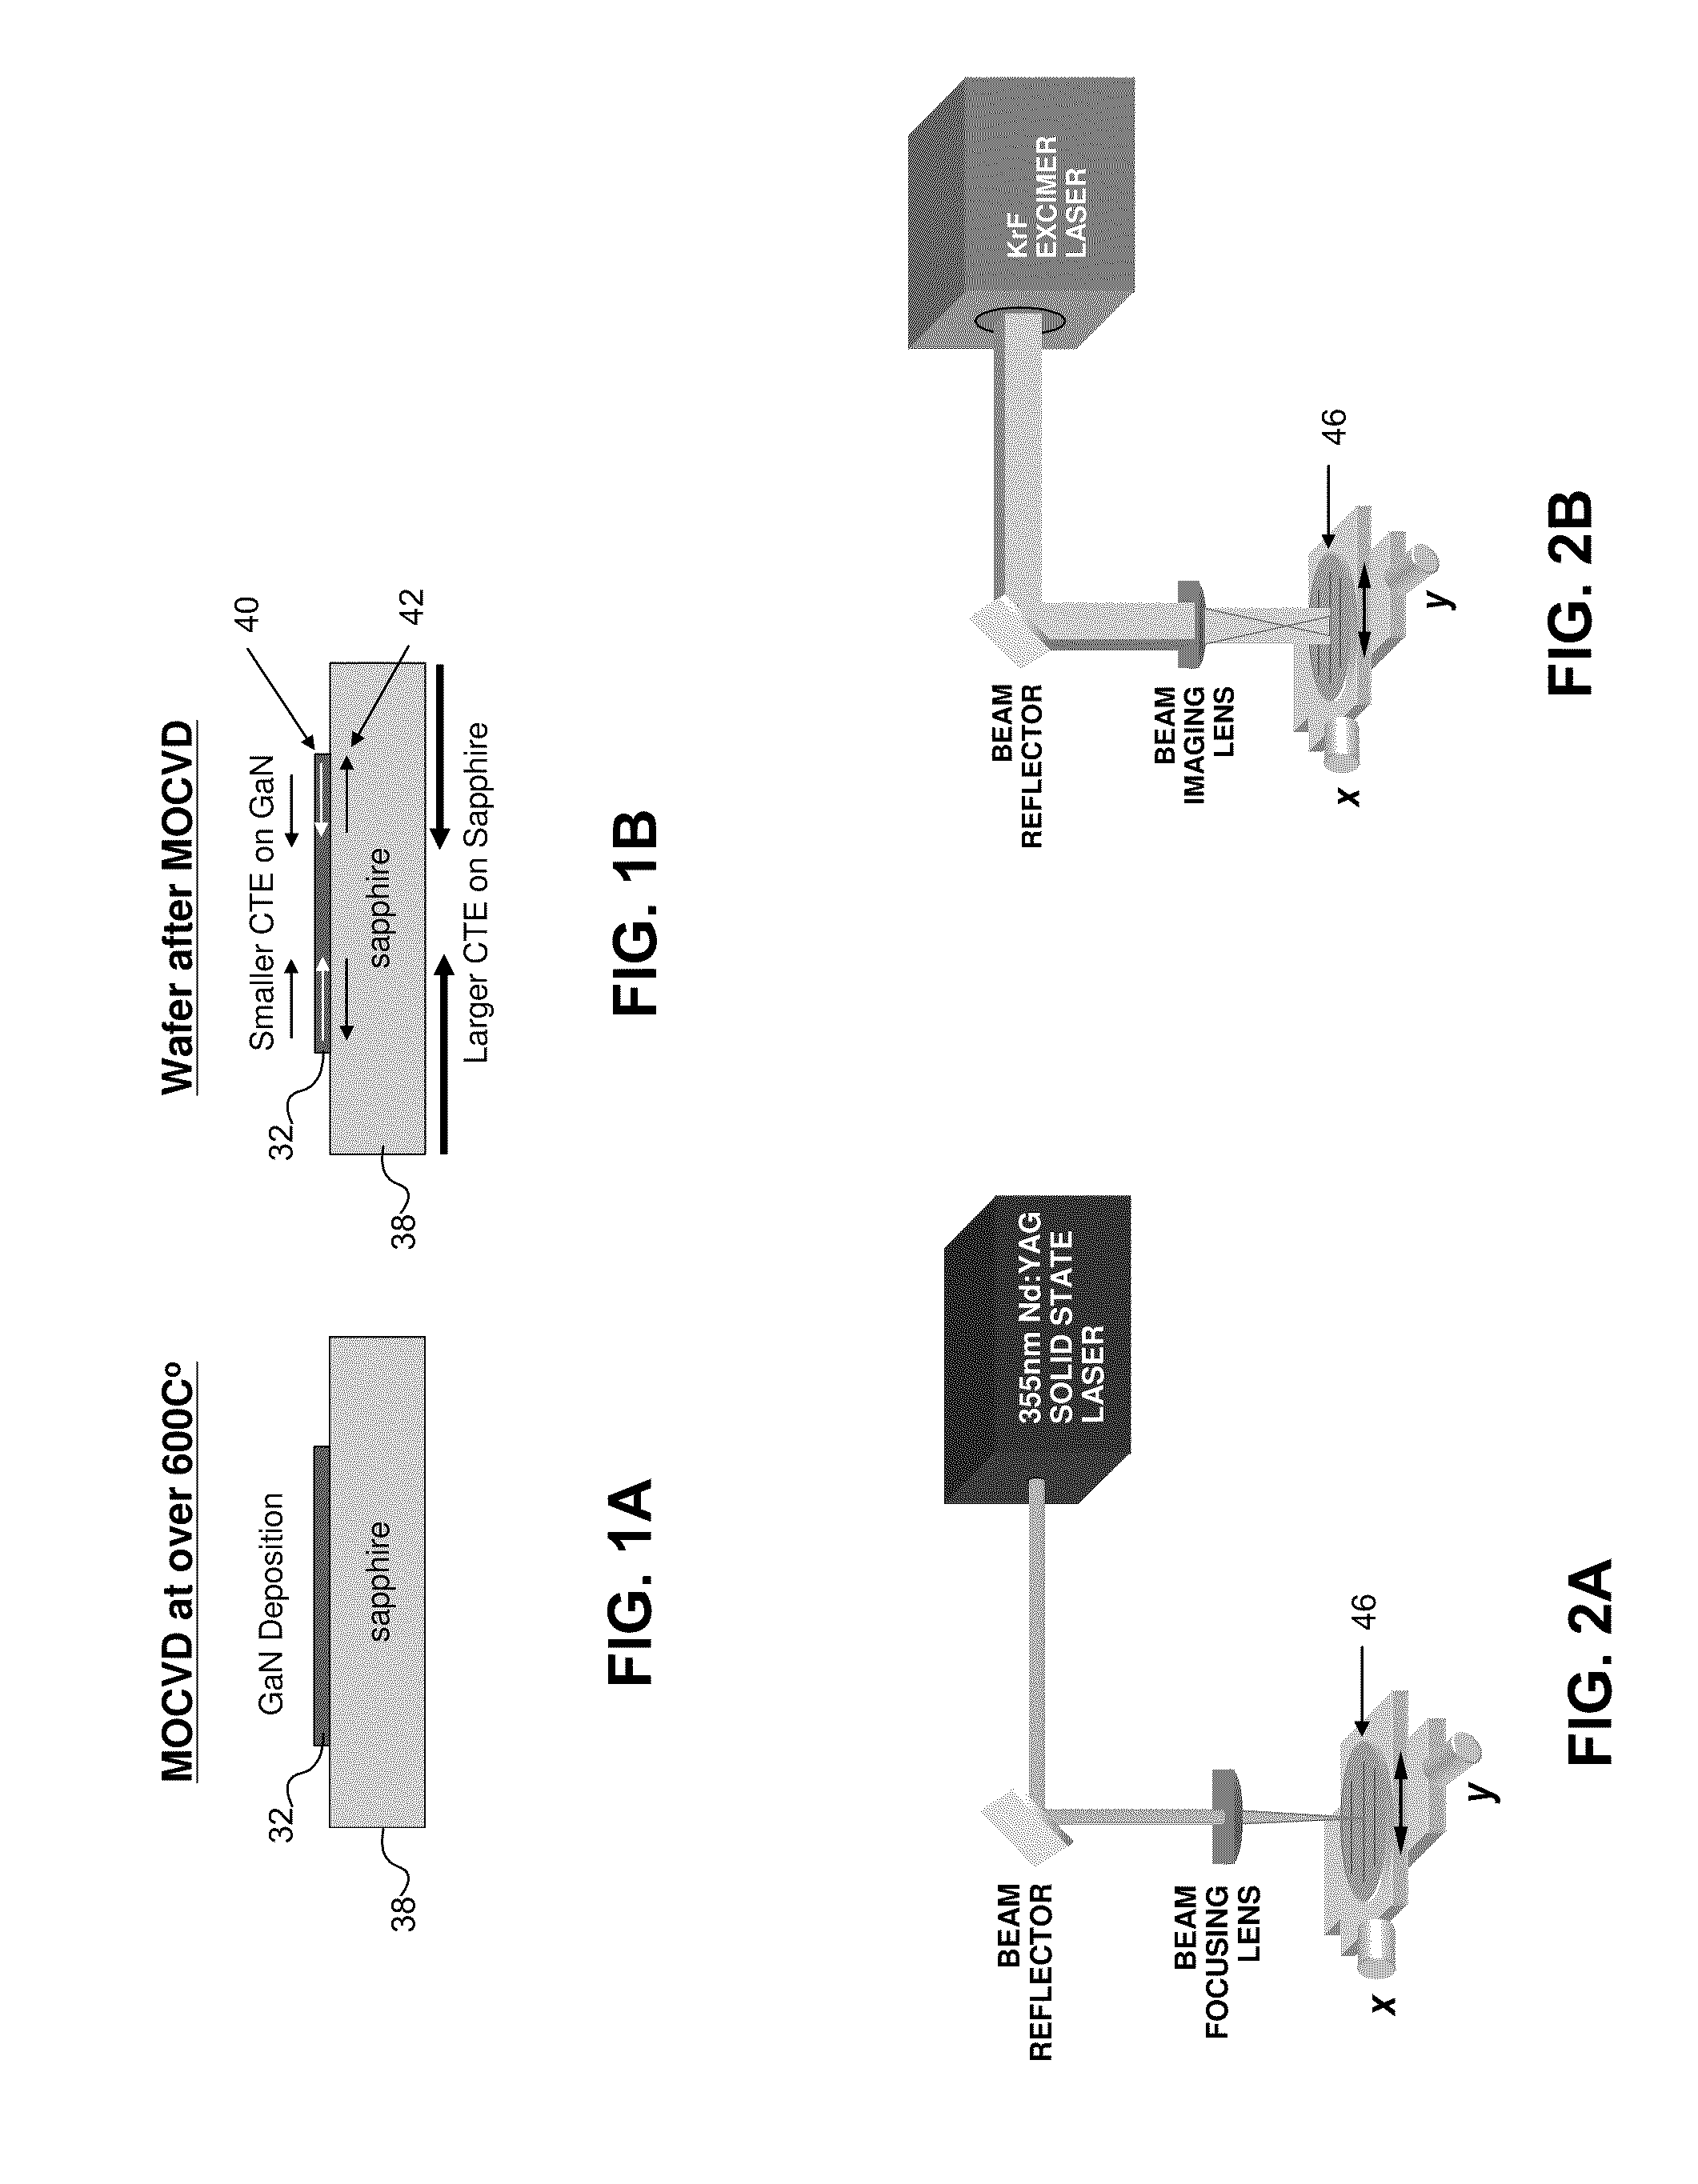 Laser lift off systems and methods